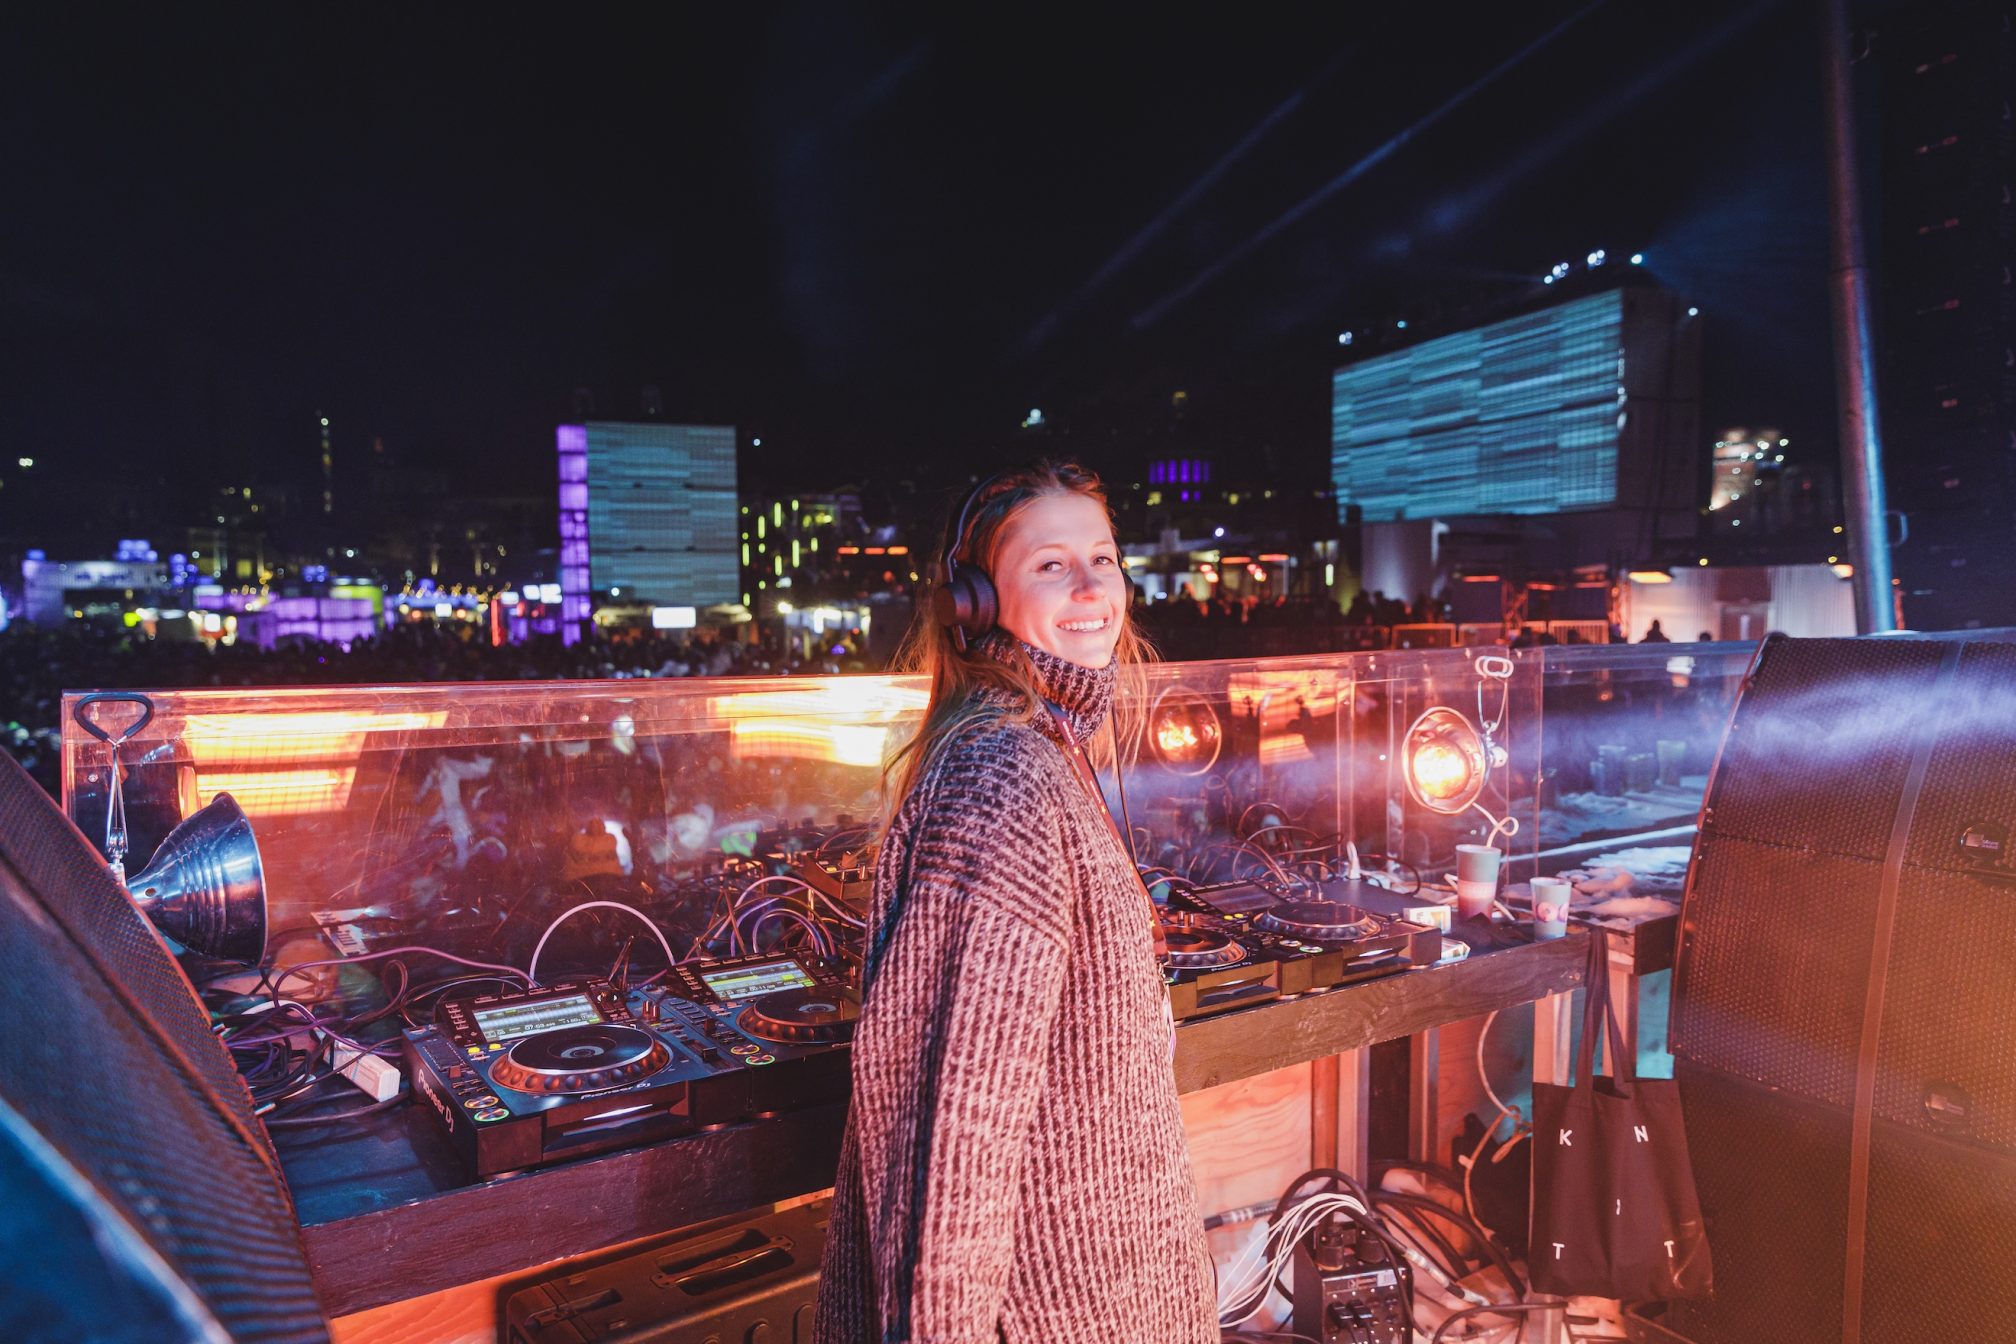 Love and raving come together at Montreal's Igloofest - - Mixmag